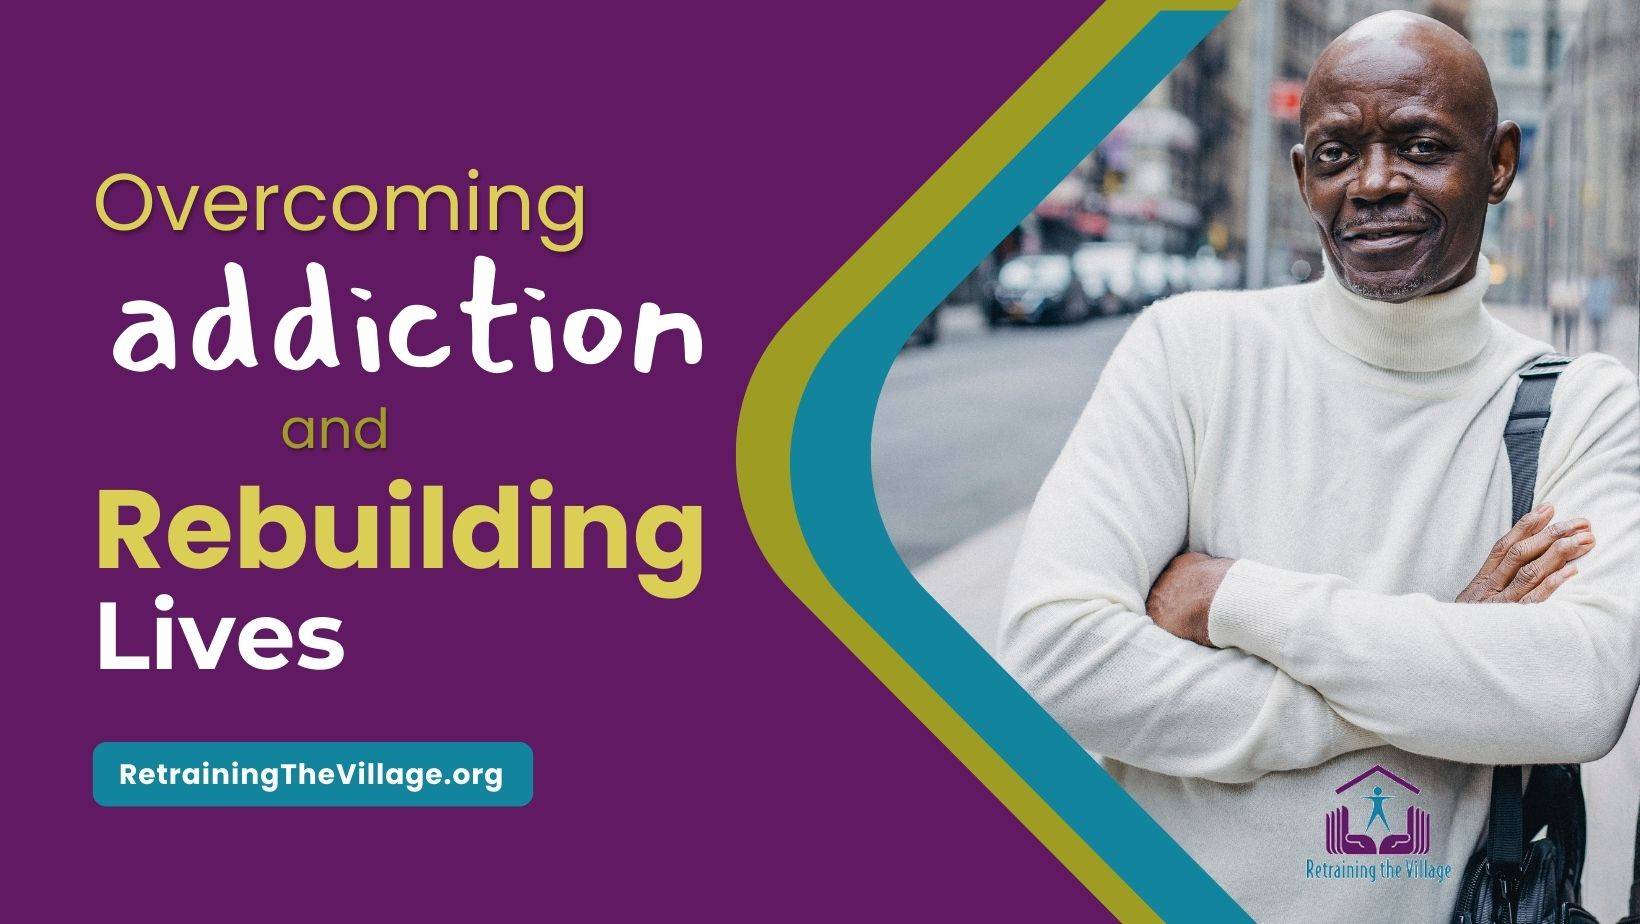 Overcoming addiction and rebuilding lives image of a black man in white sweater looking at the camera